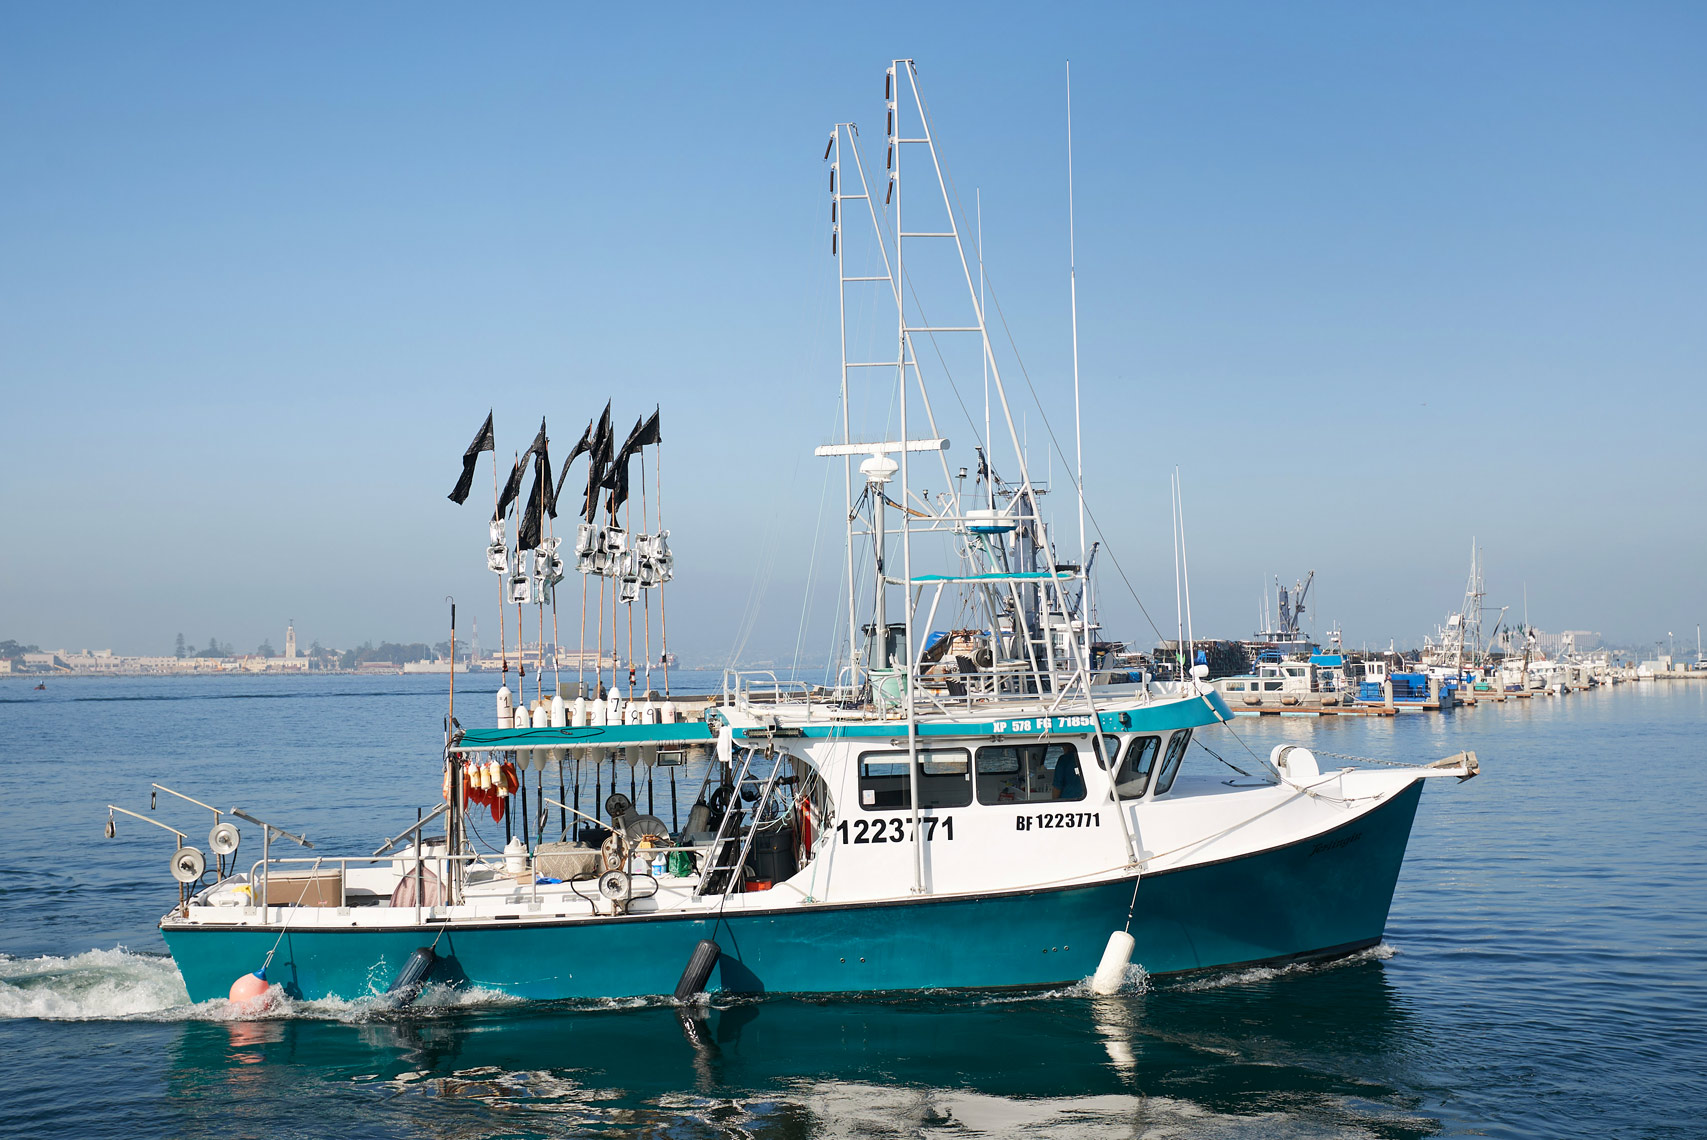 A Commercial Fishing Boat in San Diego Bay